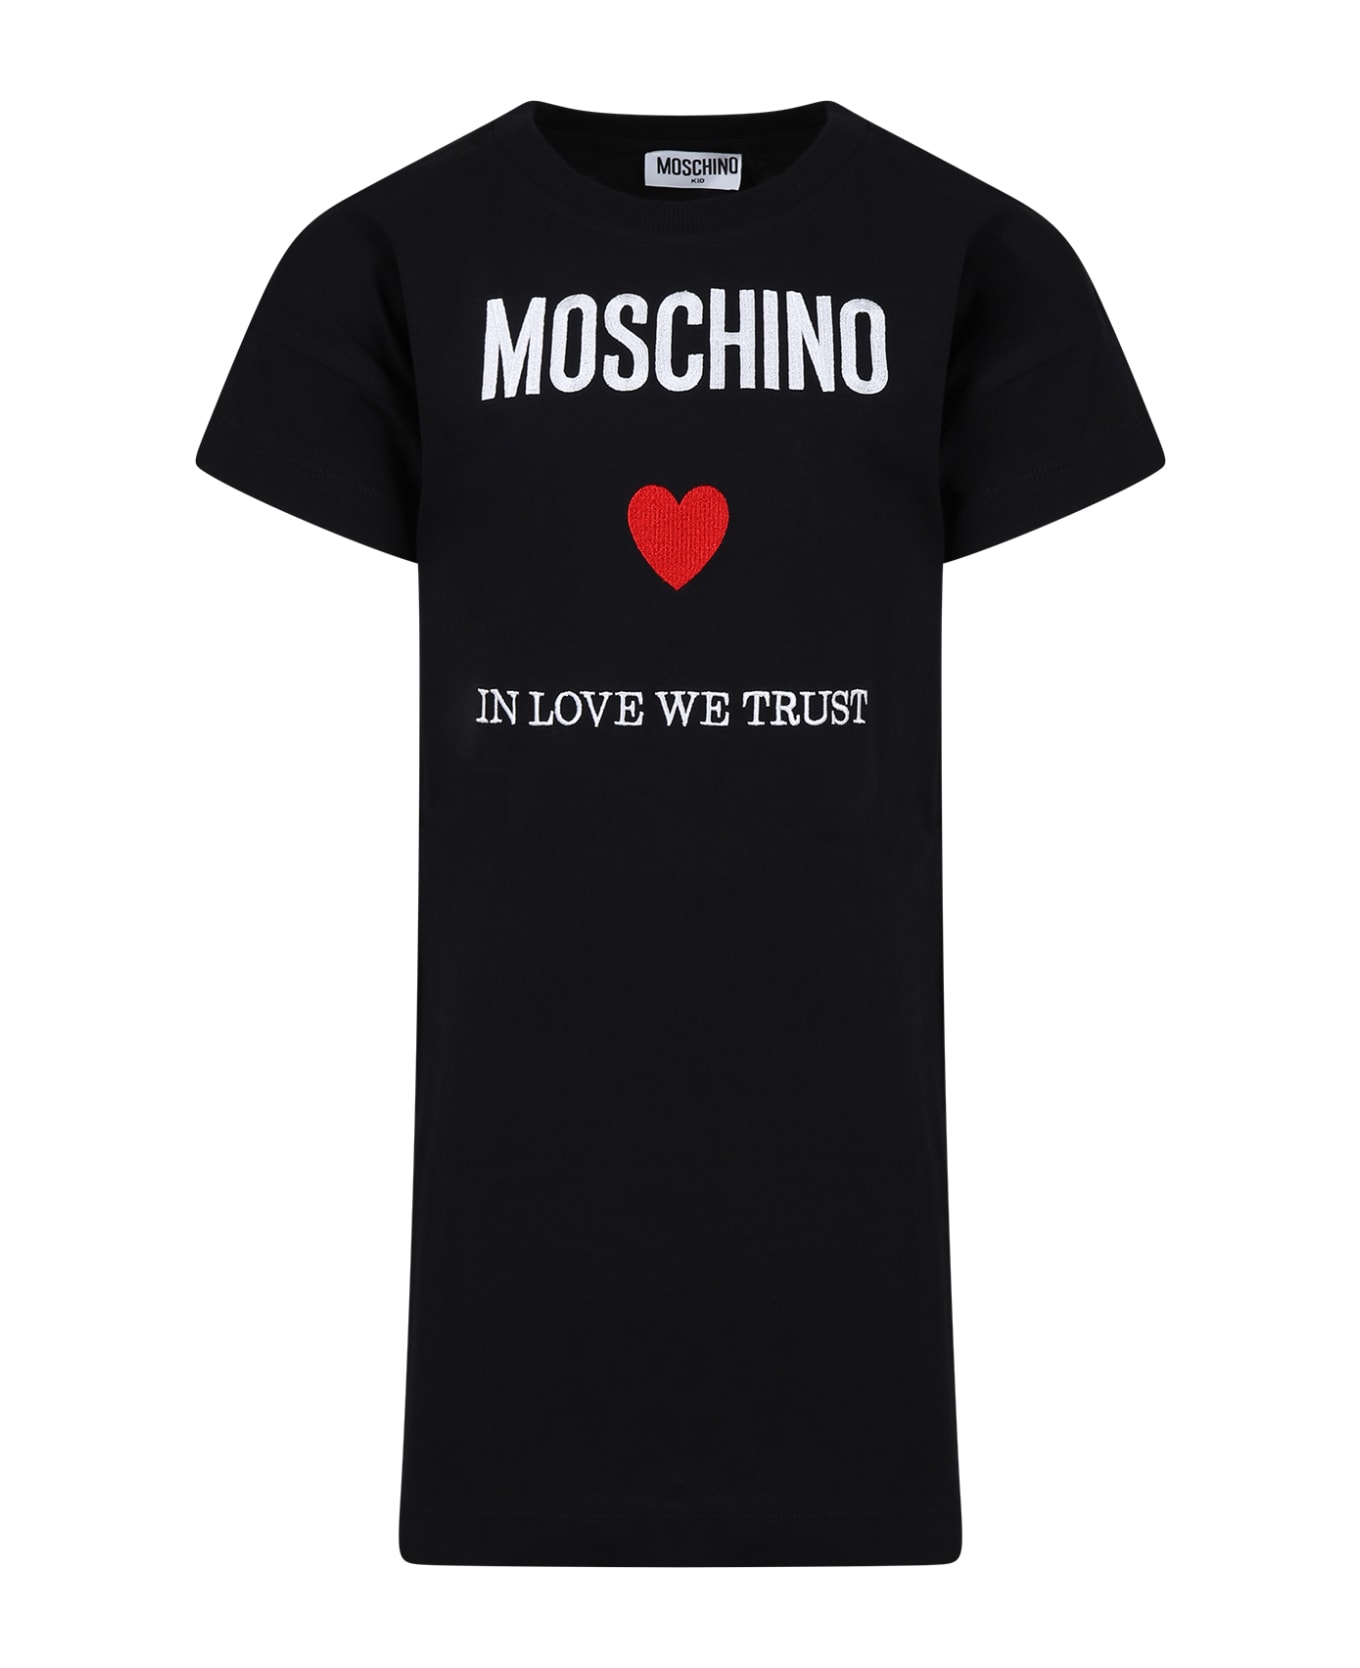 Moschino Black Dress For Girl With Logo And Heart - Black